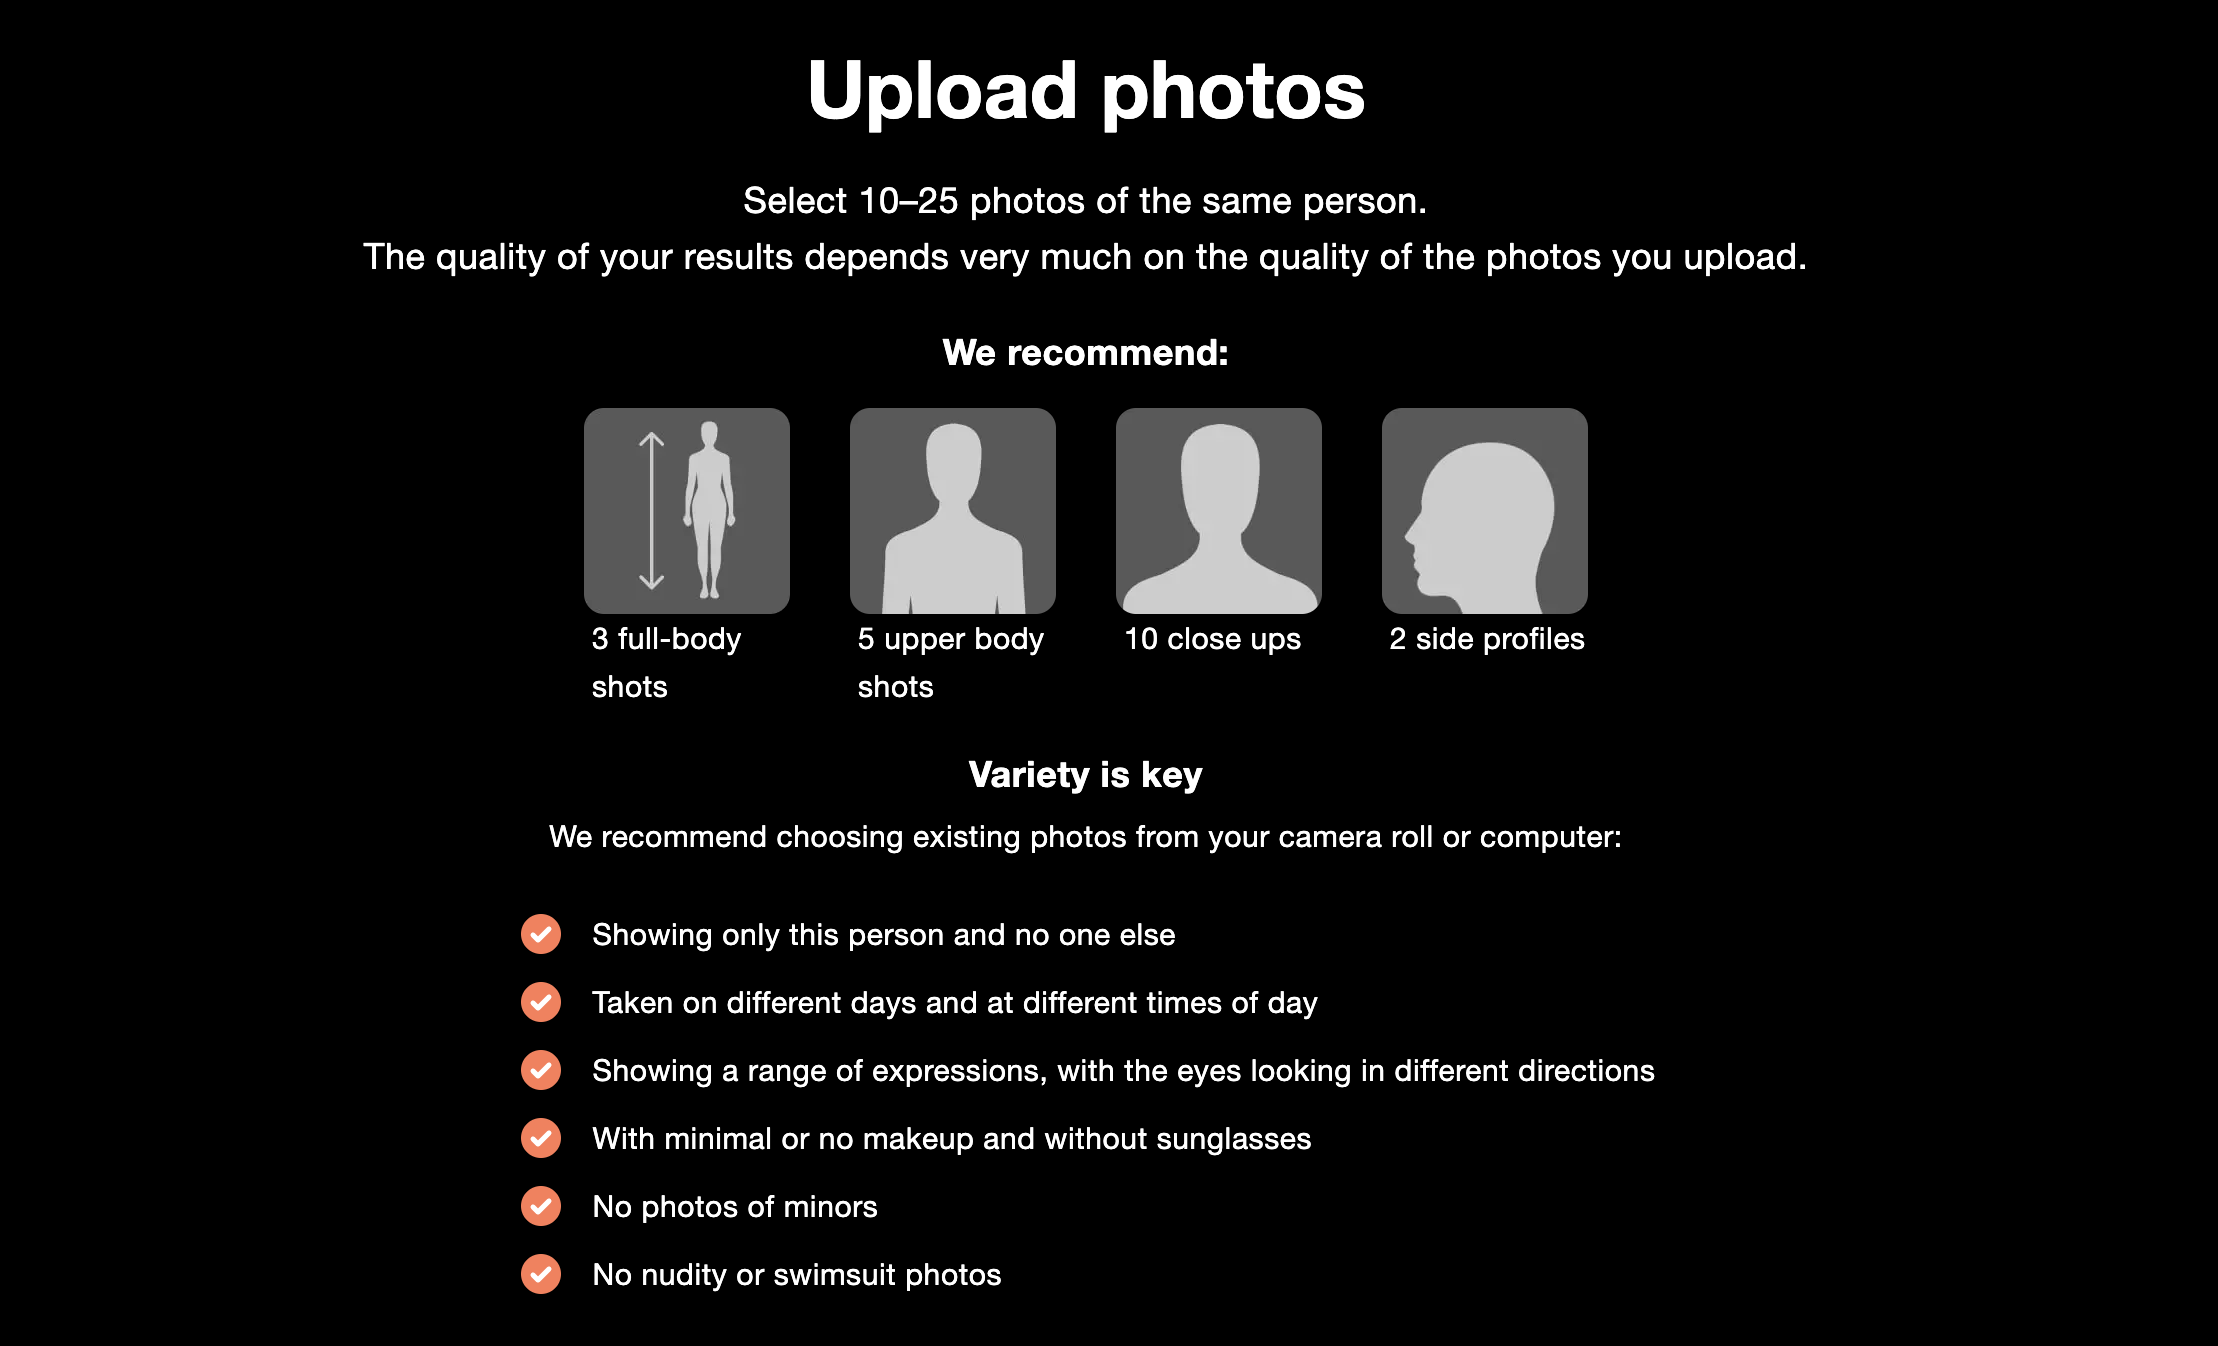 A screenshot of the AI Time Machine tool instructions for upload. The text reads: "Upload Photos. Select 10-25 photos of the same person. The quality of your results depends very much on the quality of the photos you upload. We recommend: 3 full-body shots; 5 upper body shots; 10 close ups; and 2 side profiles. Variety is key. We recommend choosing existing photos from your camera roll or computer that meet the following criteria: Showing only this persona and no one else; Taken on different days and at different times of day; Showing a range of expressions with the eyes looking in different directions; With minimal or no makeup and without sunglasses; No photos of minors; No nudity or swimsuit photos."